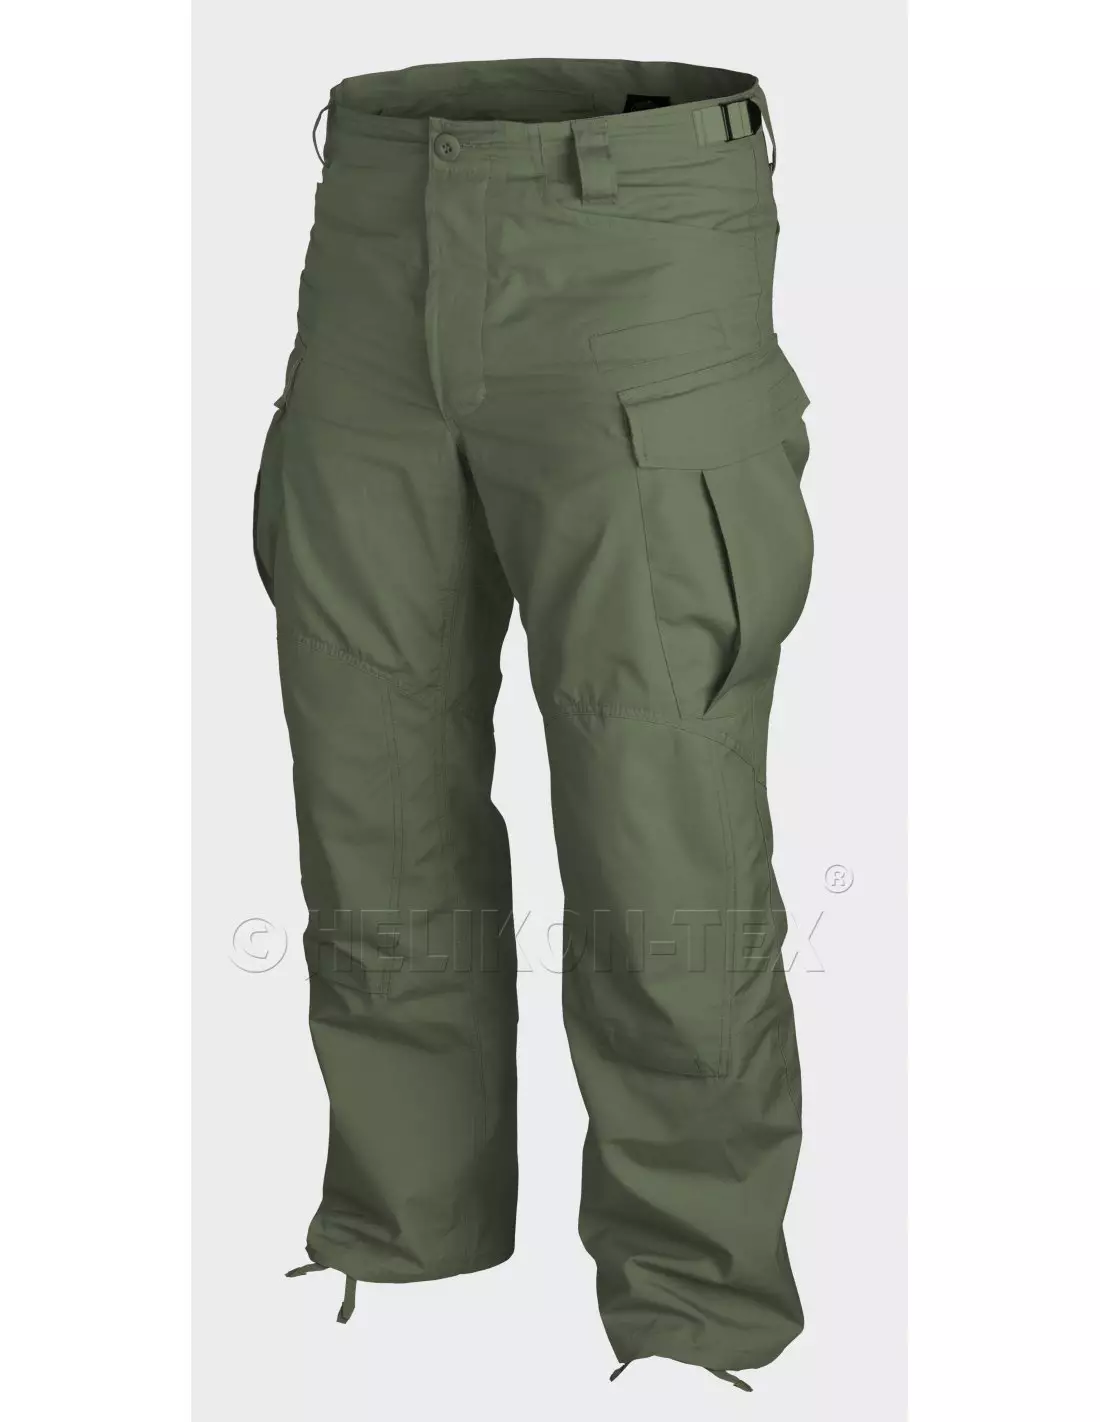 special forces cargo pants